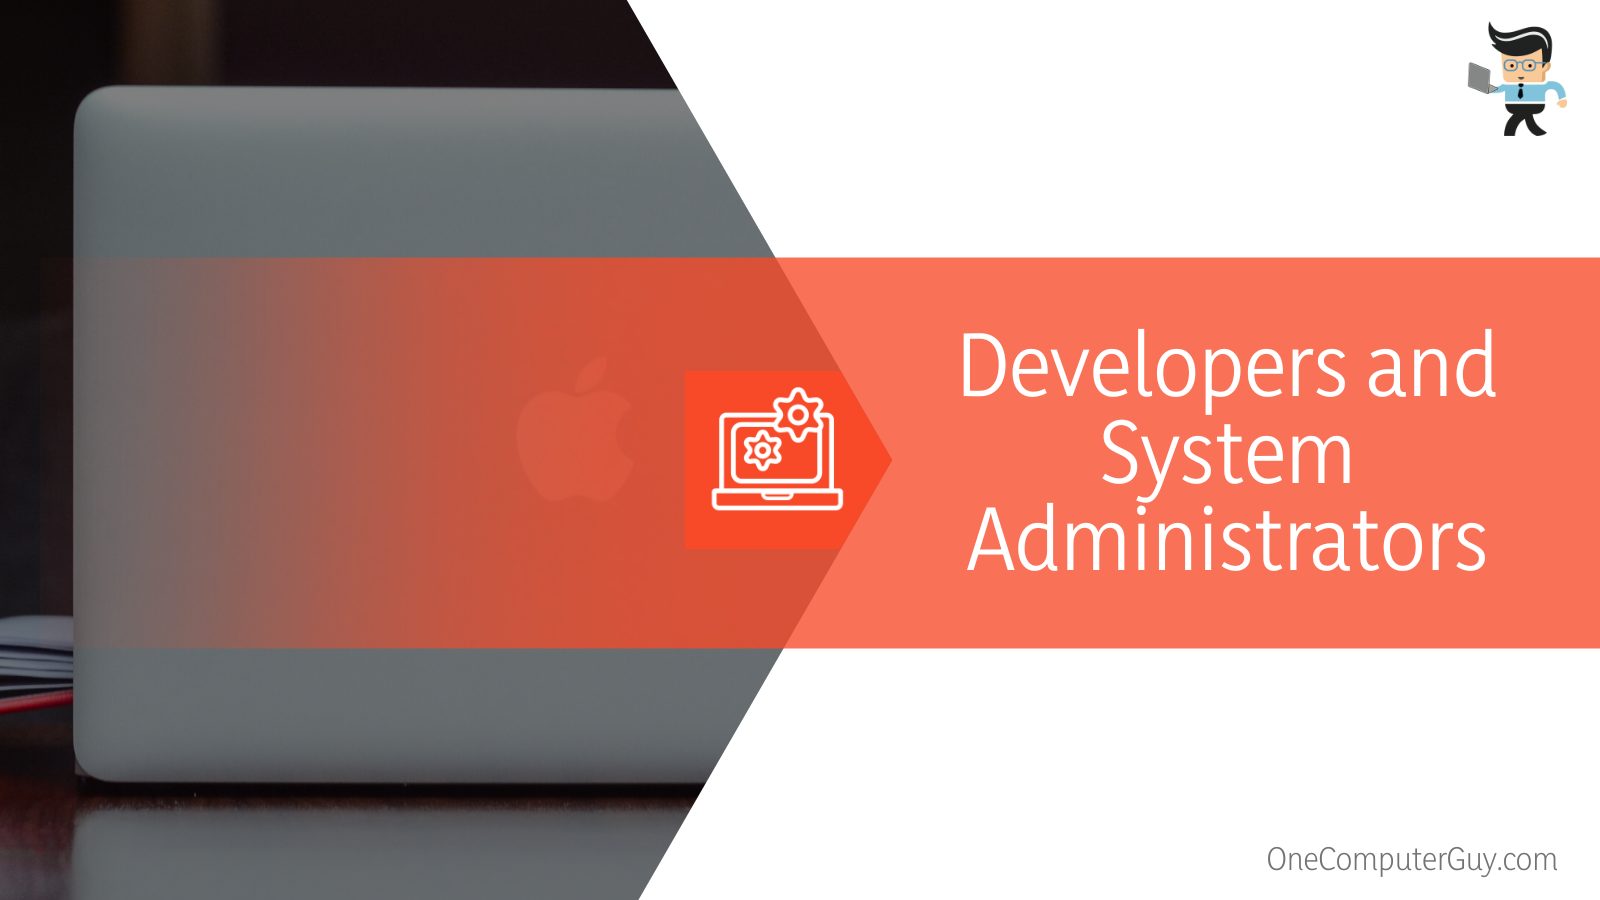 Developers and System Administrators